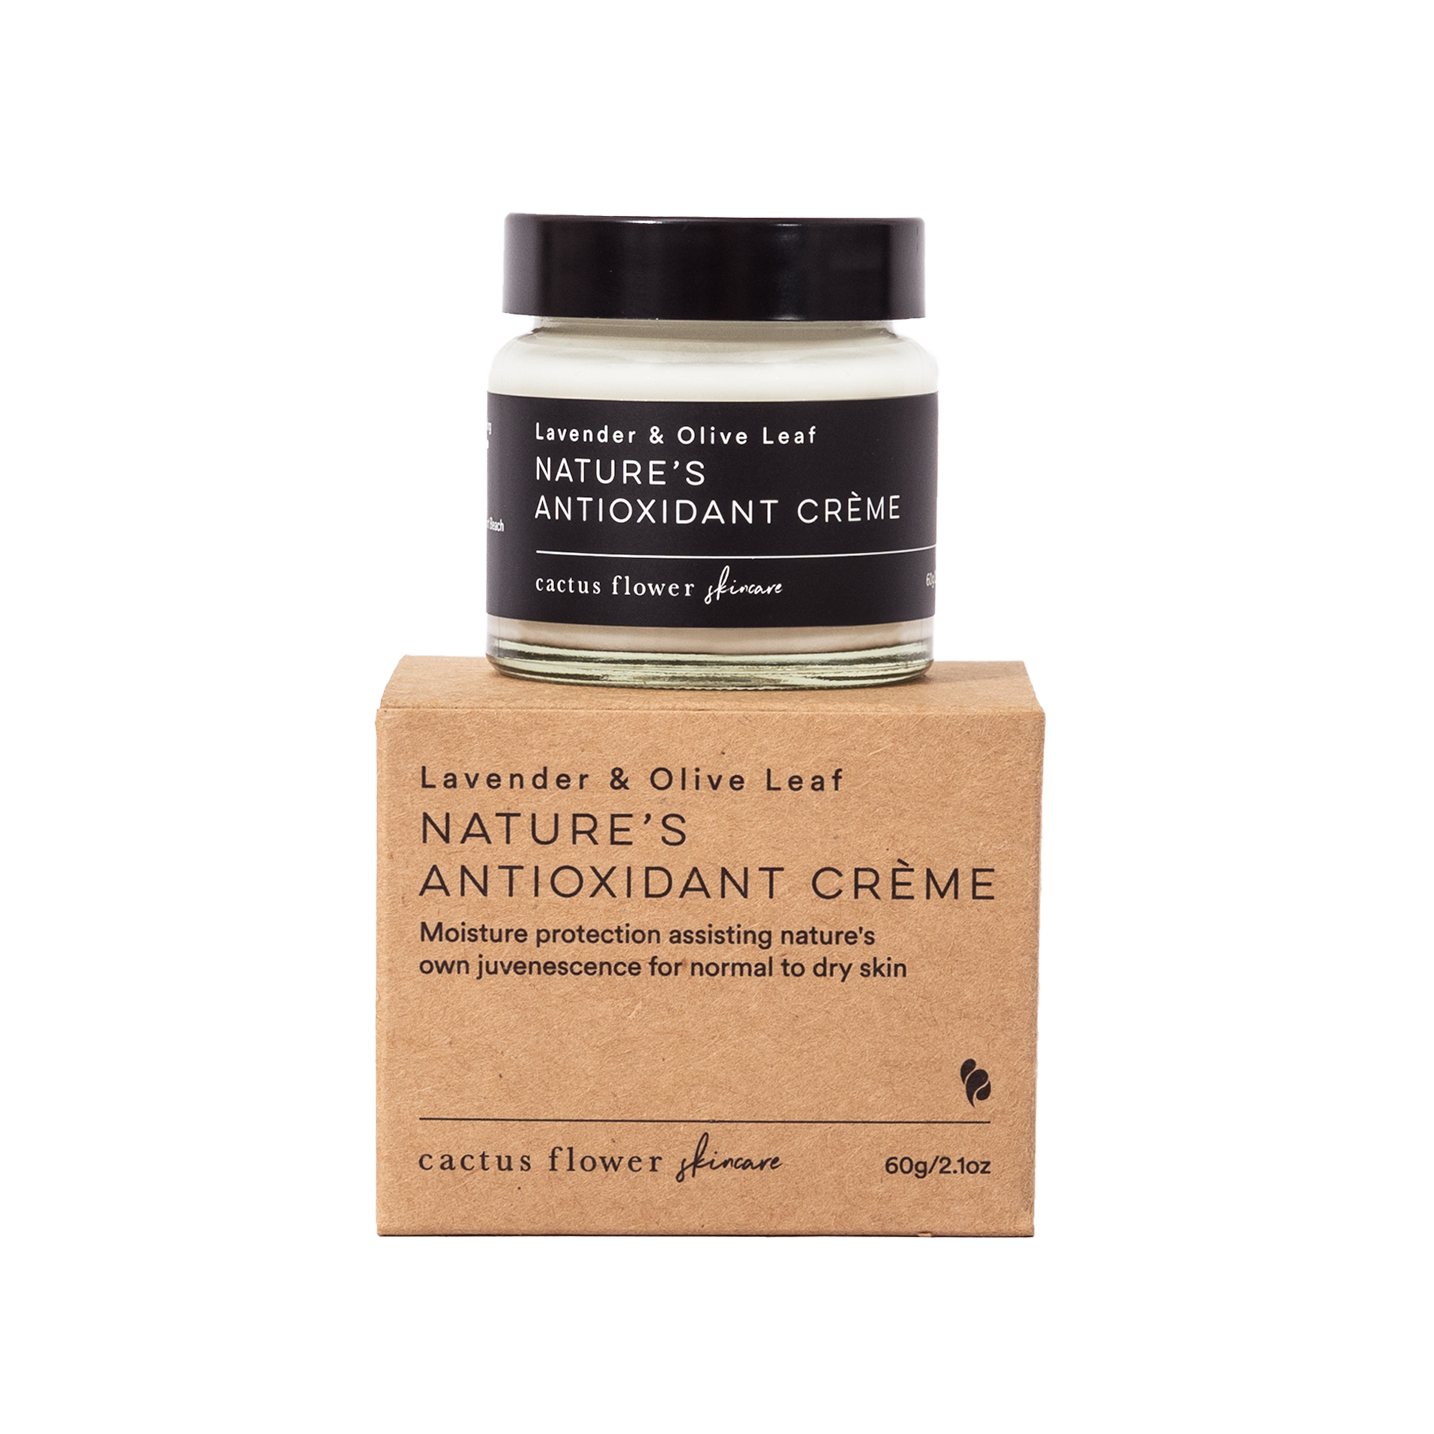 Nature's Antioxidant Creme with Product Box